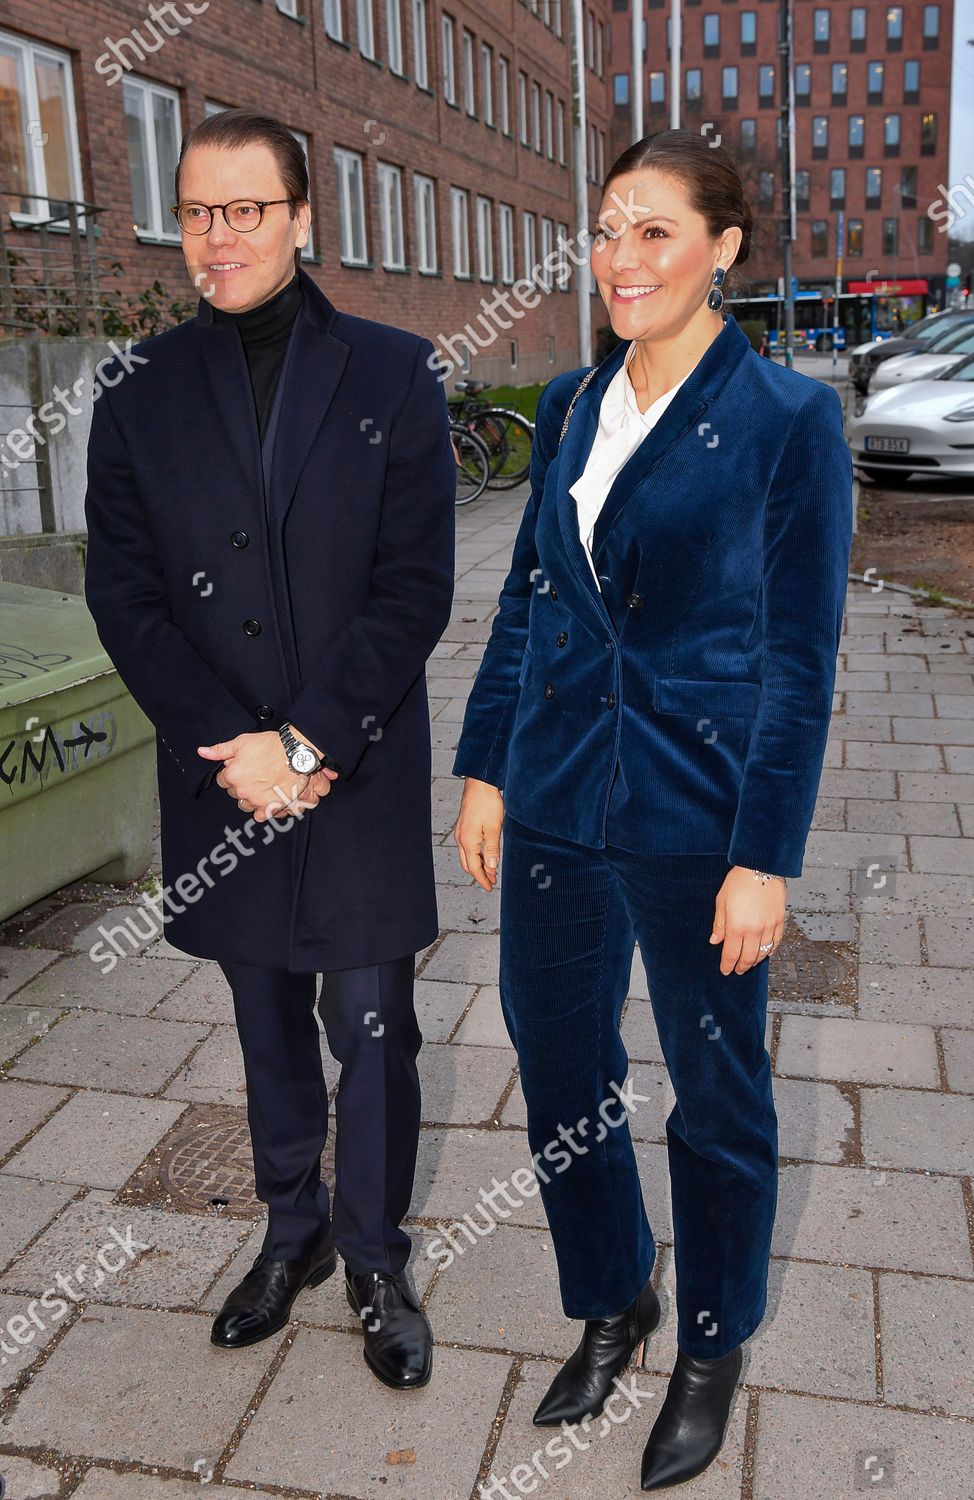 crown-princess-victoria-and-prince-daniel-visit-the-the-national-board-of-health-and-welfare-stockholm-sweden-shutterstock-editorial-10527975a.jpg